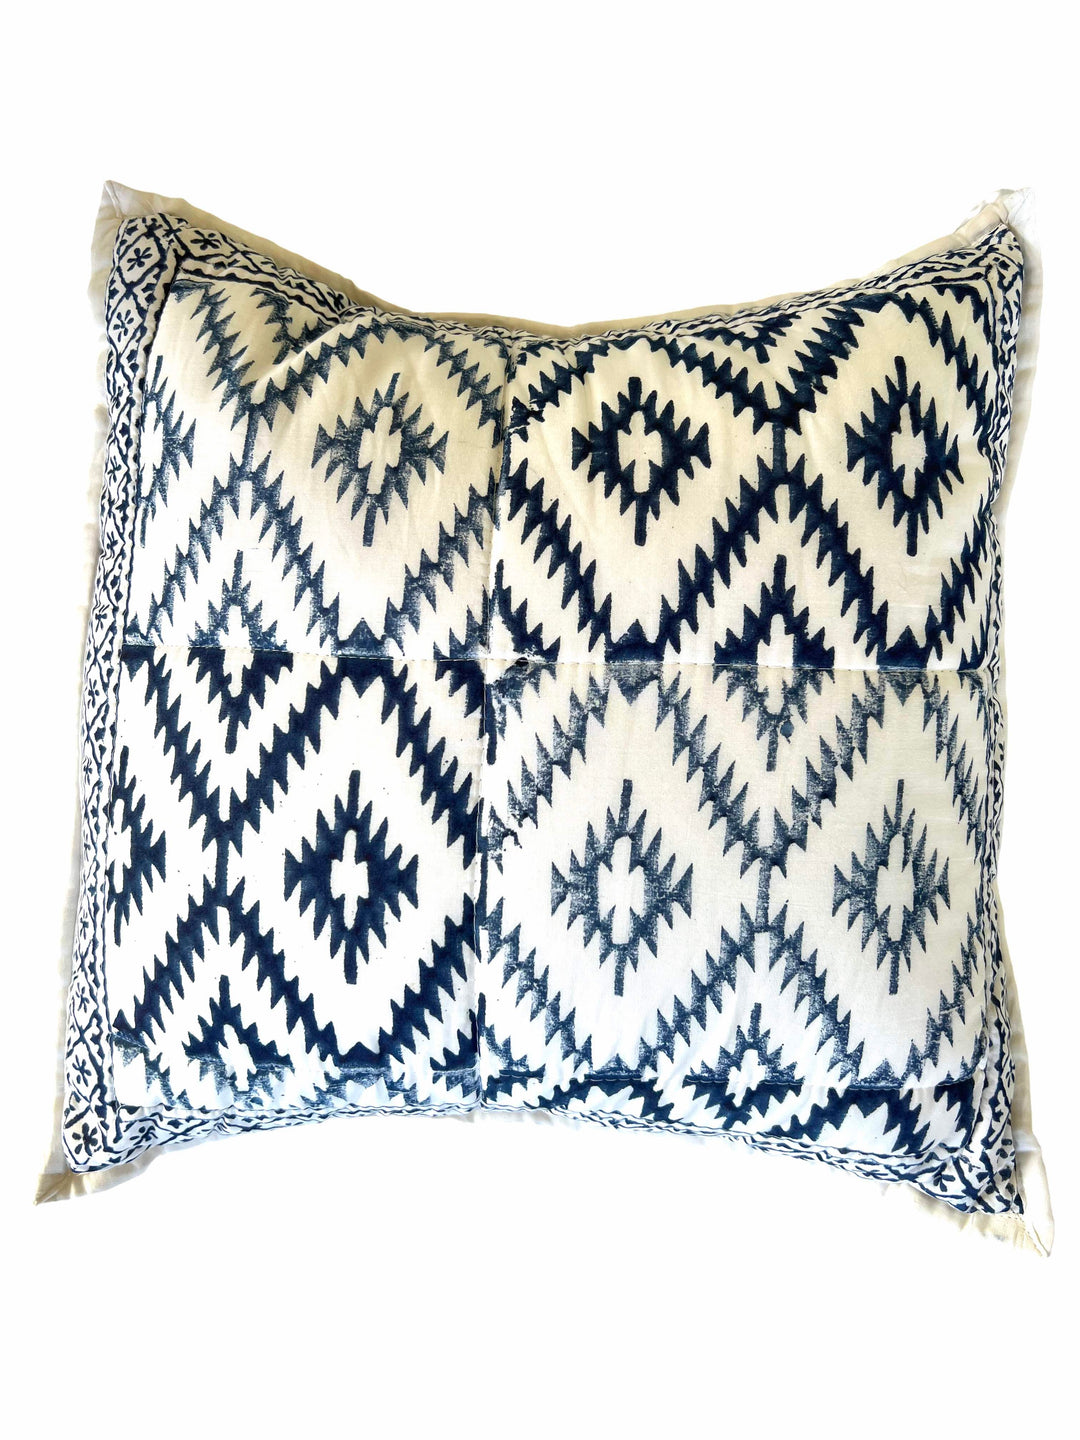 Blue Chevron - 16" square quilted pillow cover